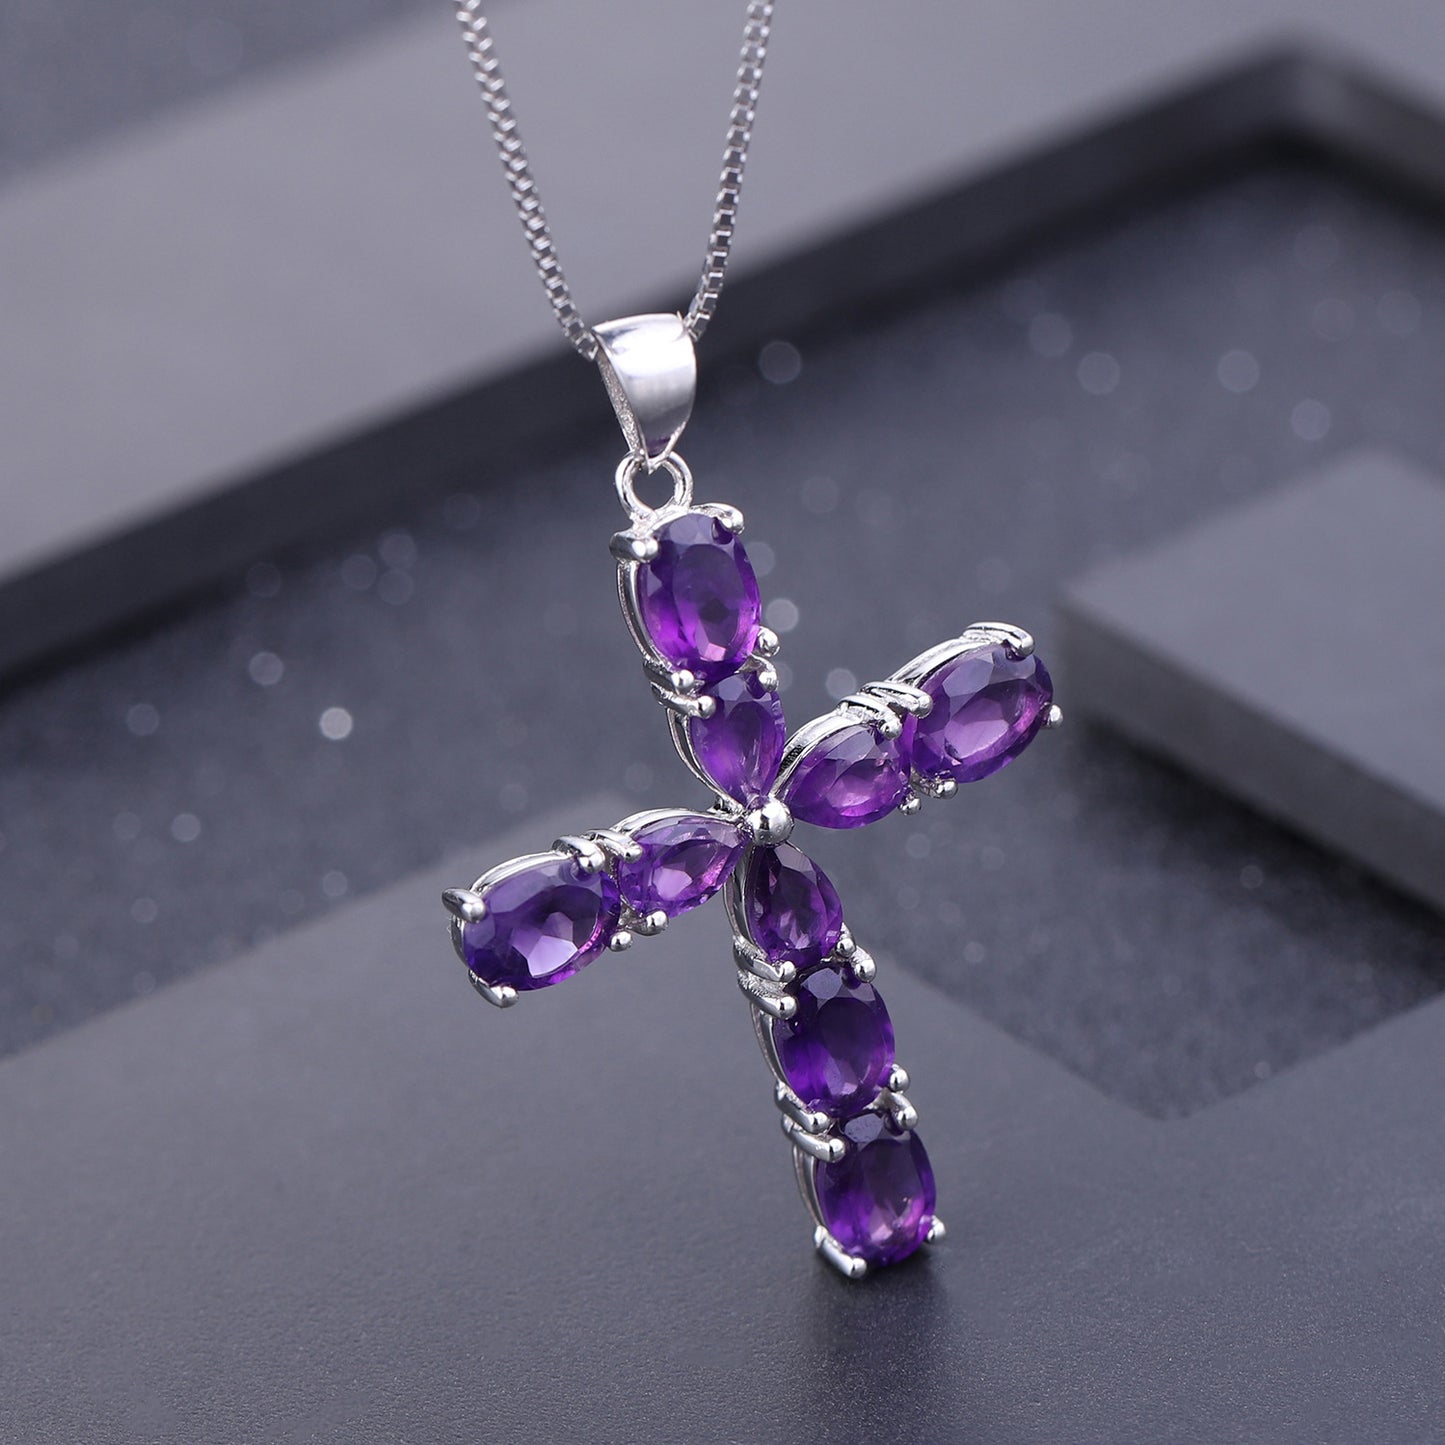 Europen Style Inlaid Natural Amethyst Cross Pendant Silver Necklace for Women